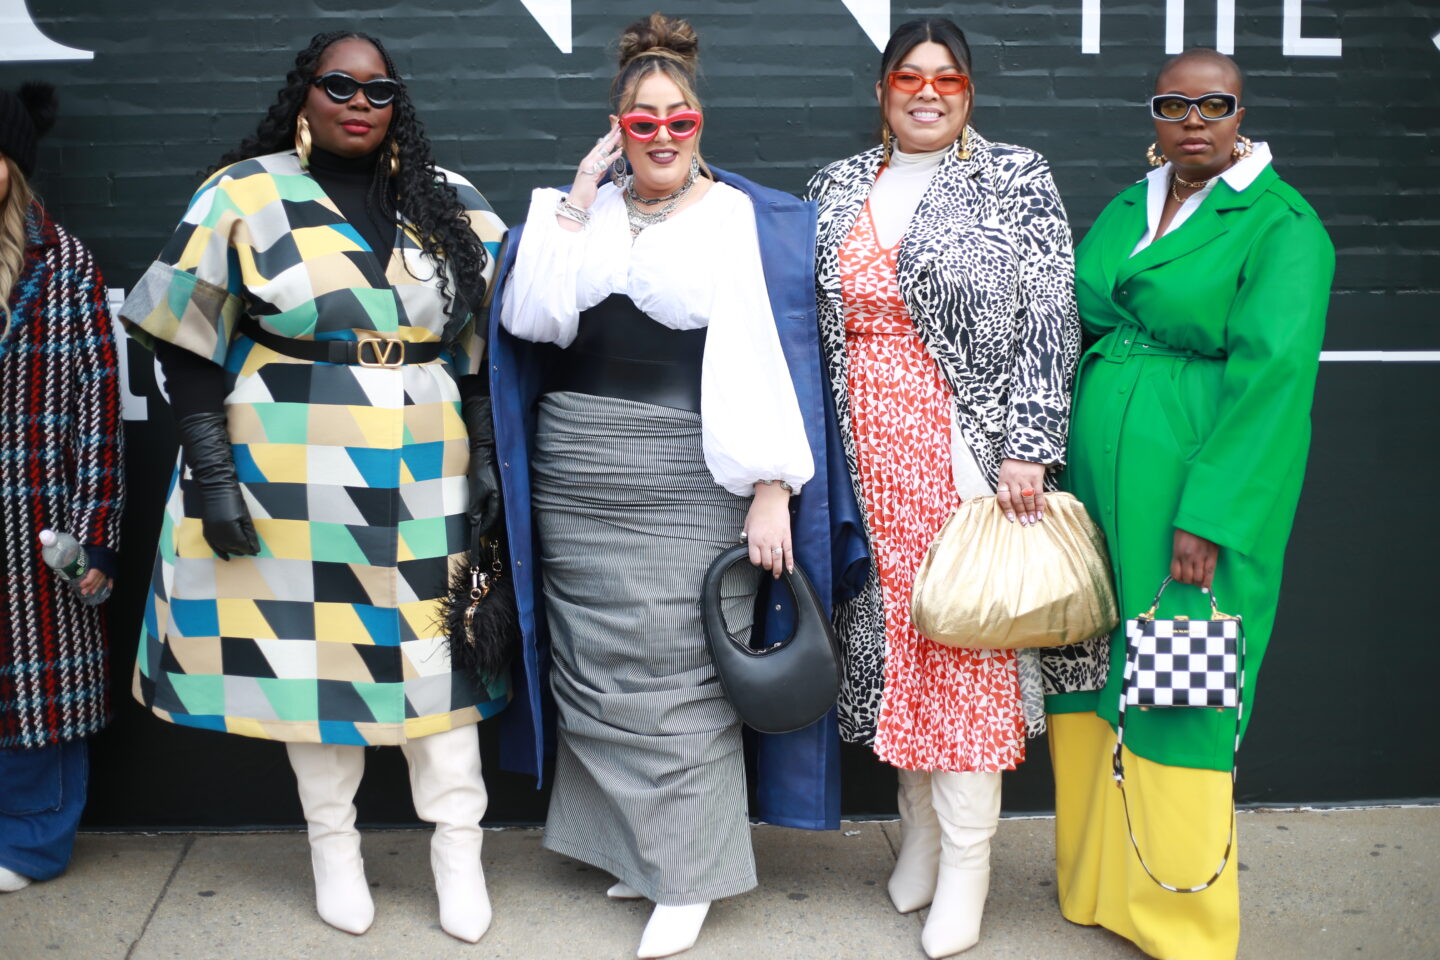 Plus size women in front of New York Fashion Week
Photo credit: Tip.Raw